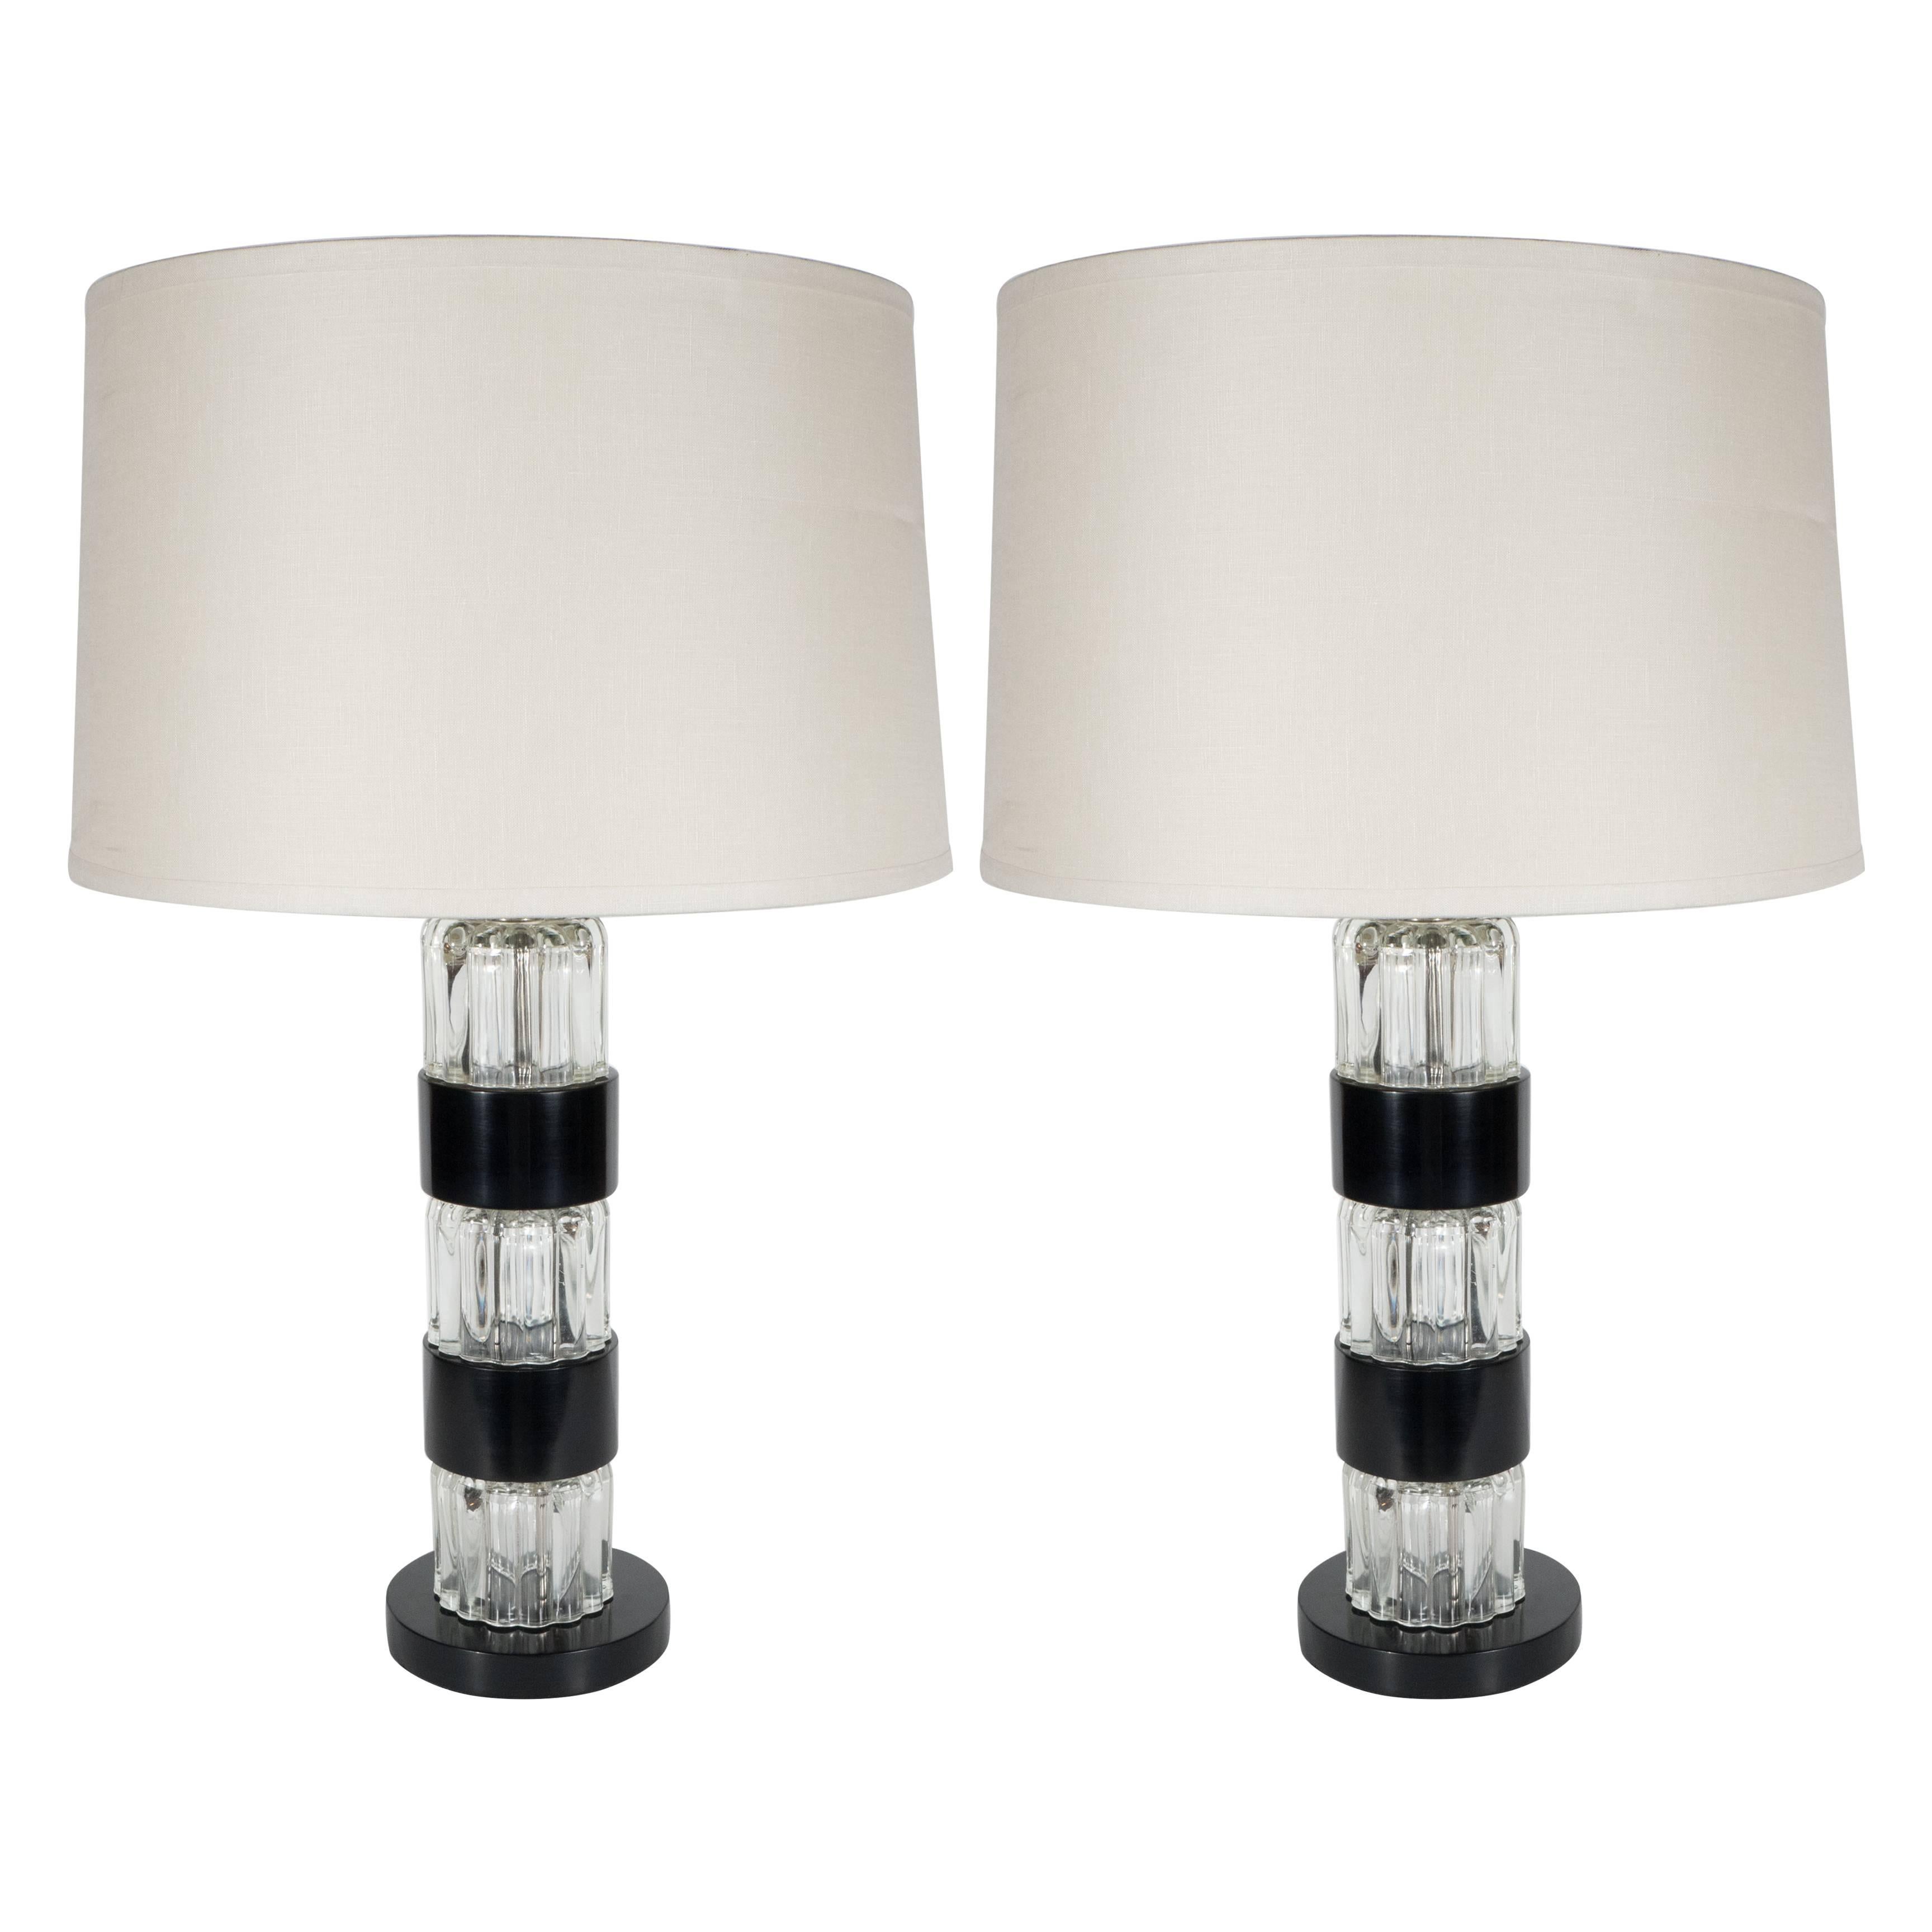 Mid-Century Modern Pair of Table Lamps by Russel Wright, American, circa 1950